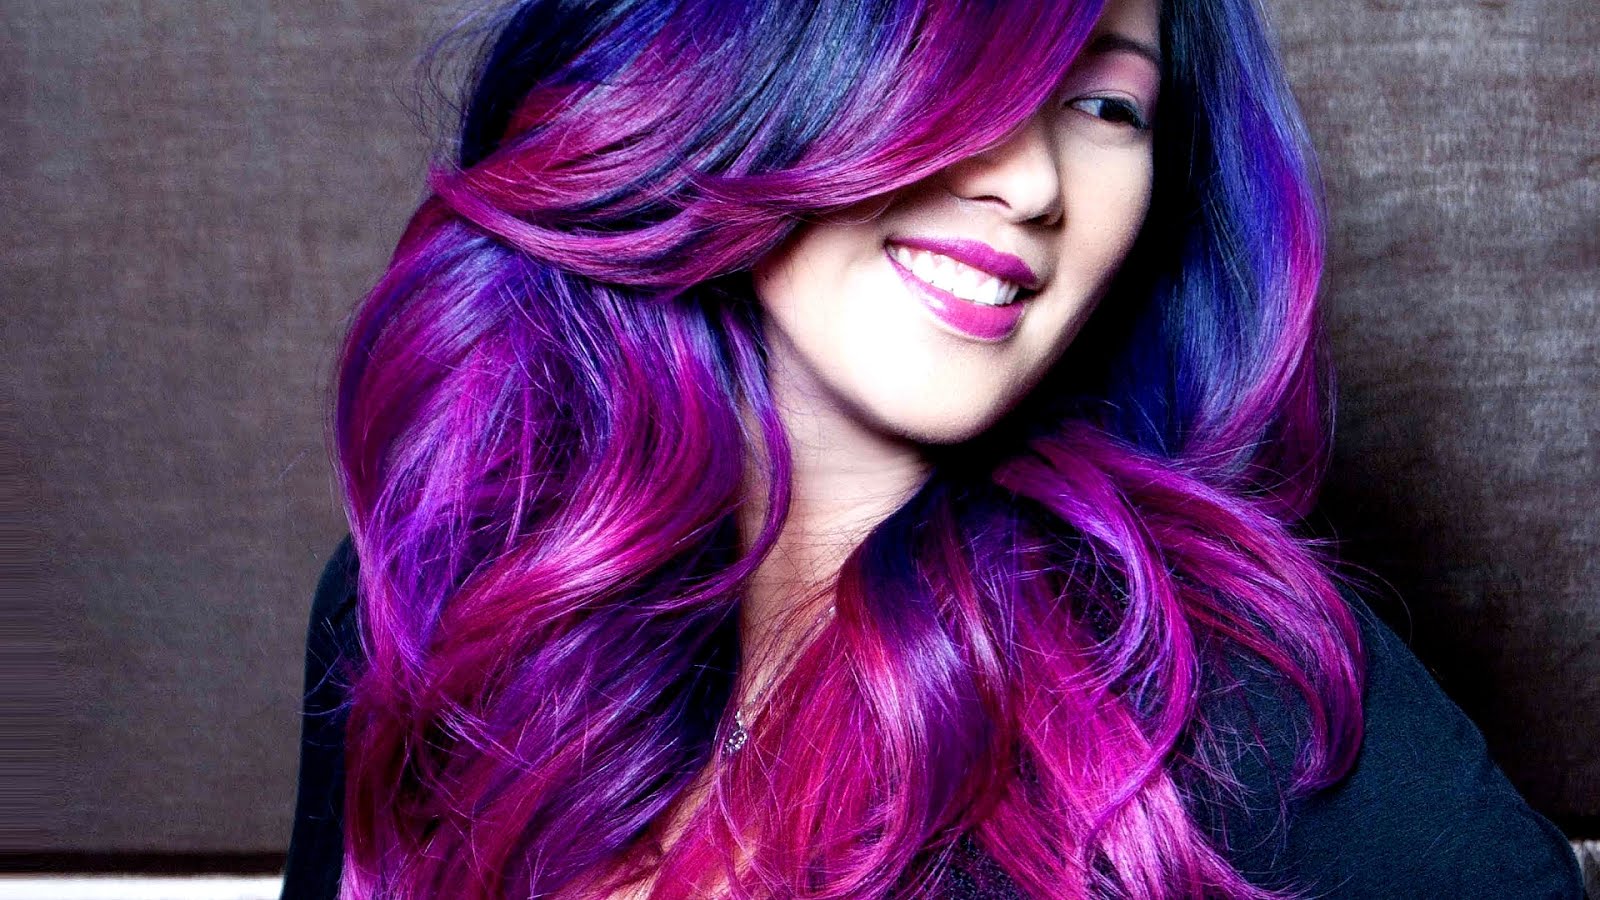 1. "How to Achieve Dark Blue to Pink Hair at Home" - wide 9